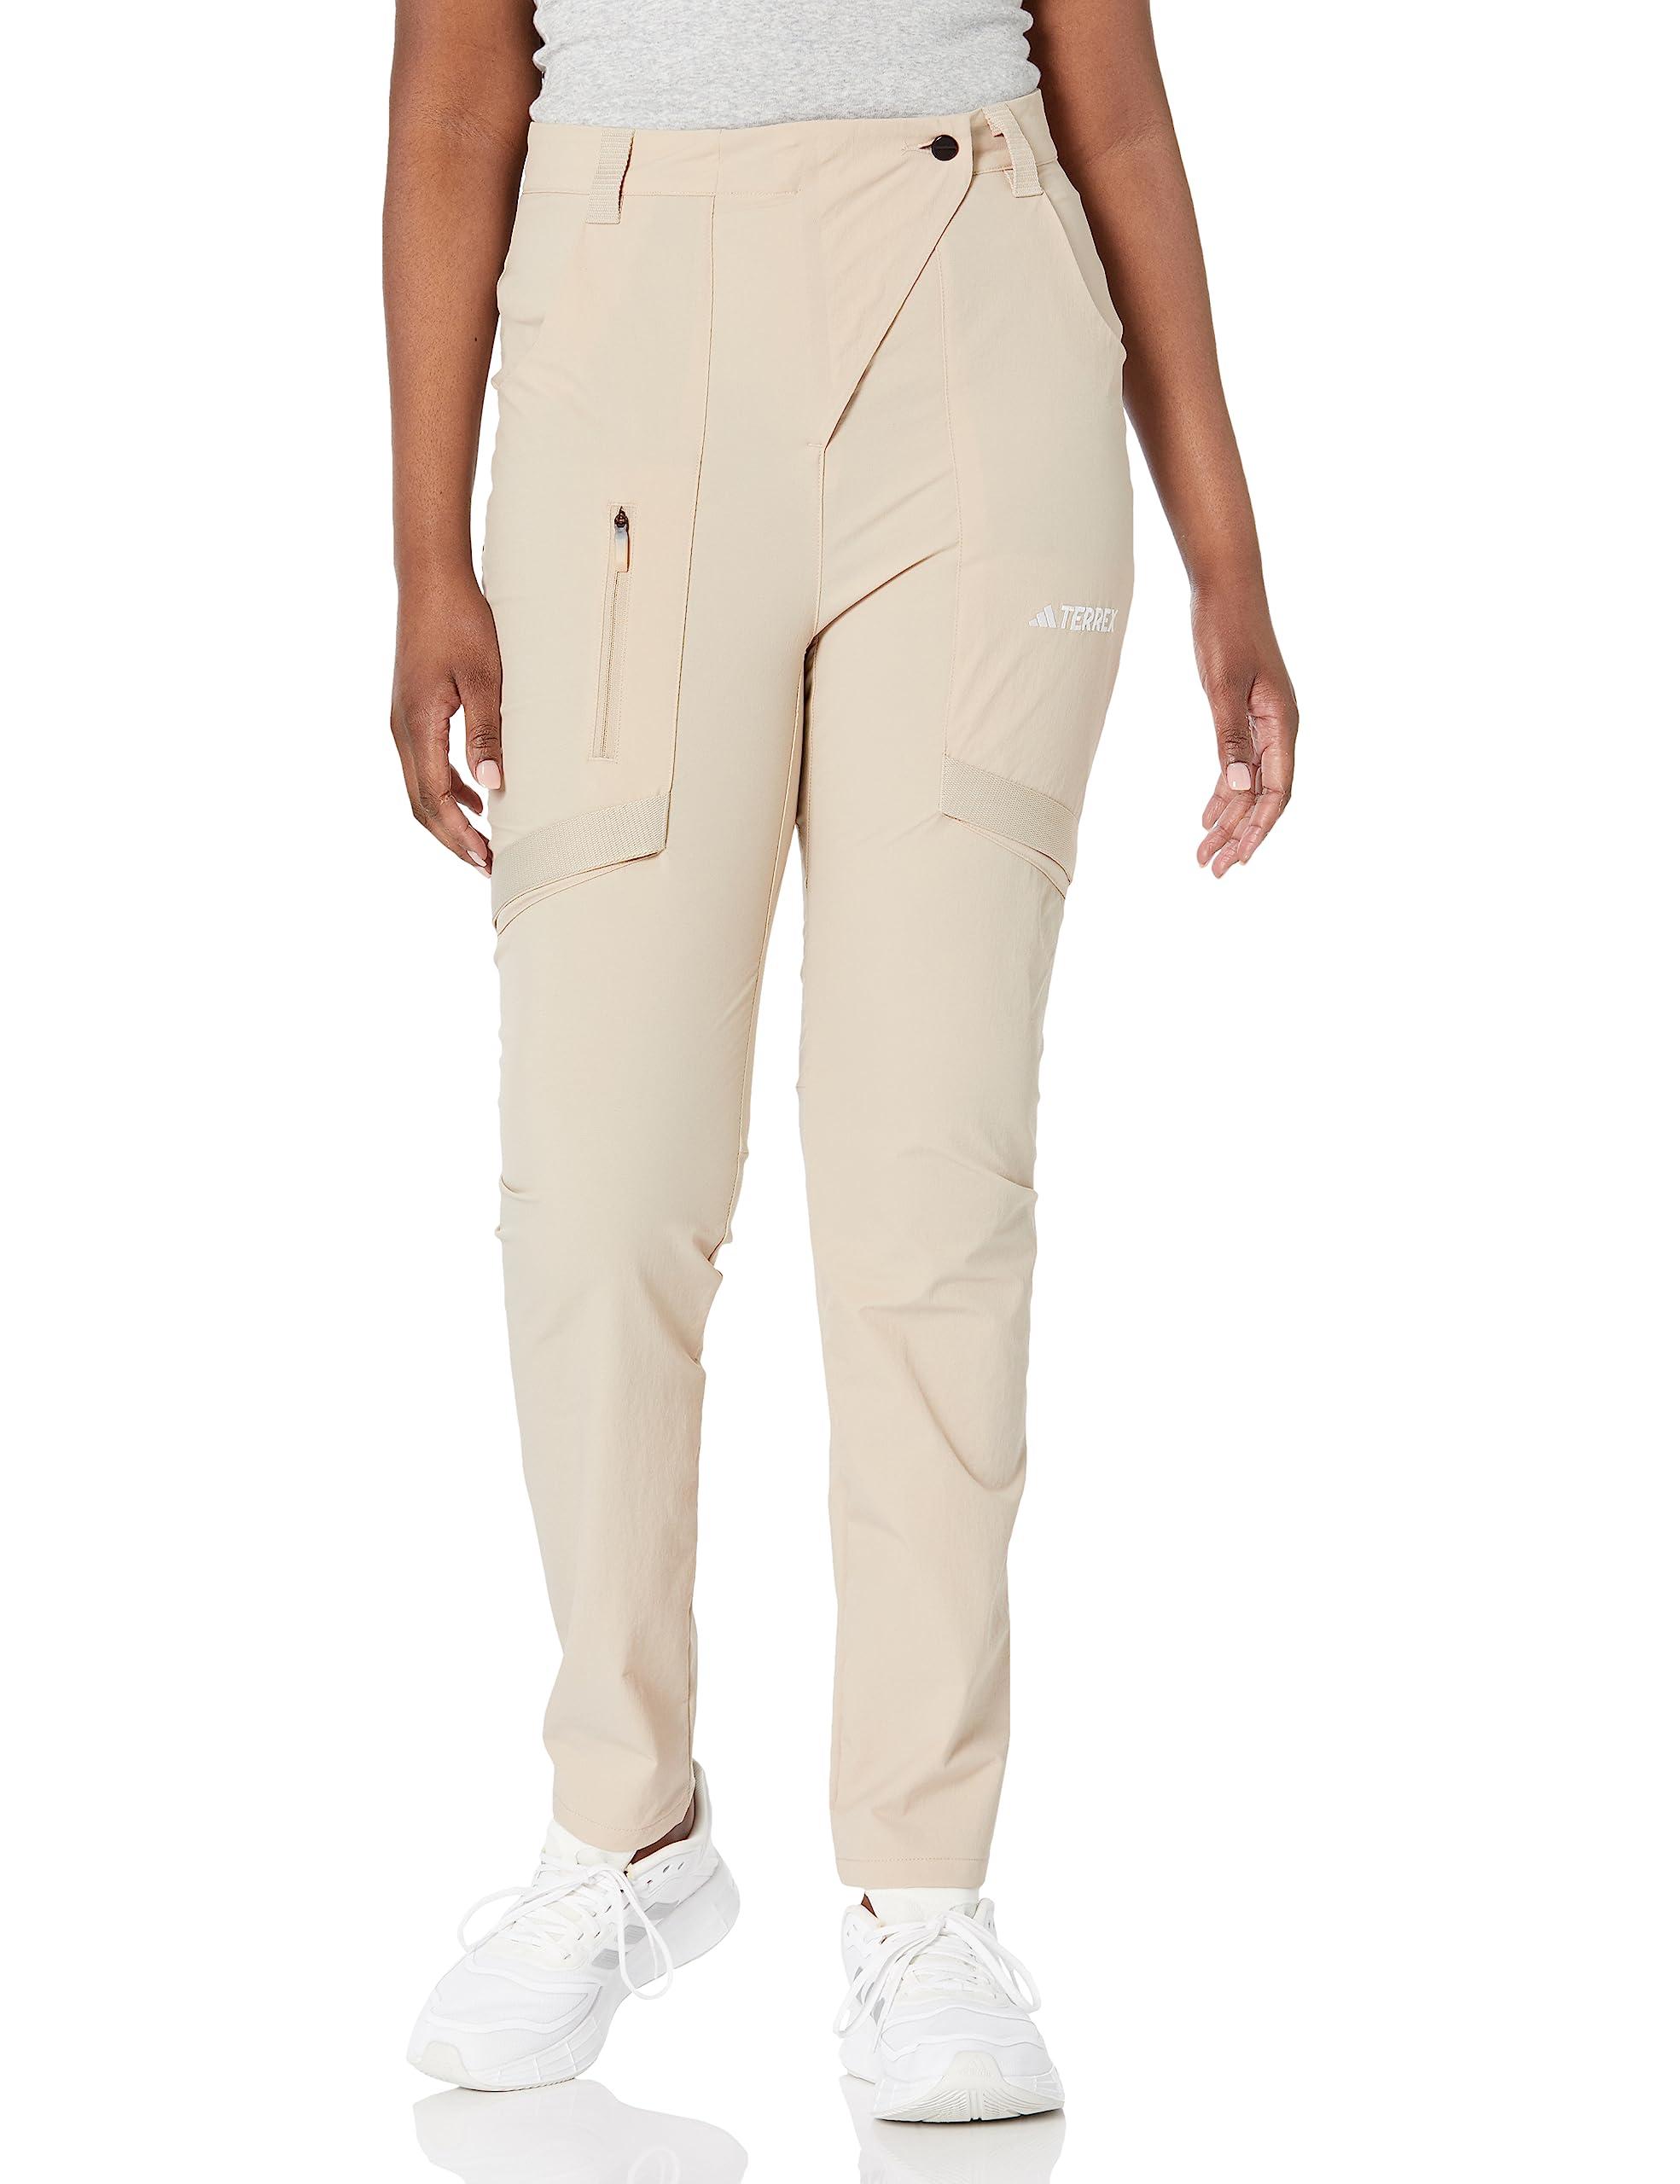 adidas Terrex Xperior Pants in Natural | Lyst